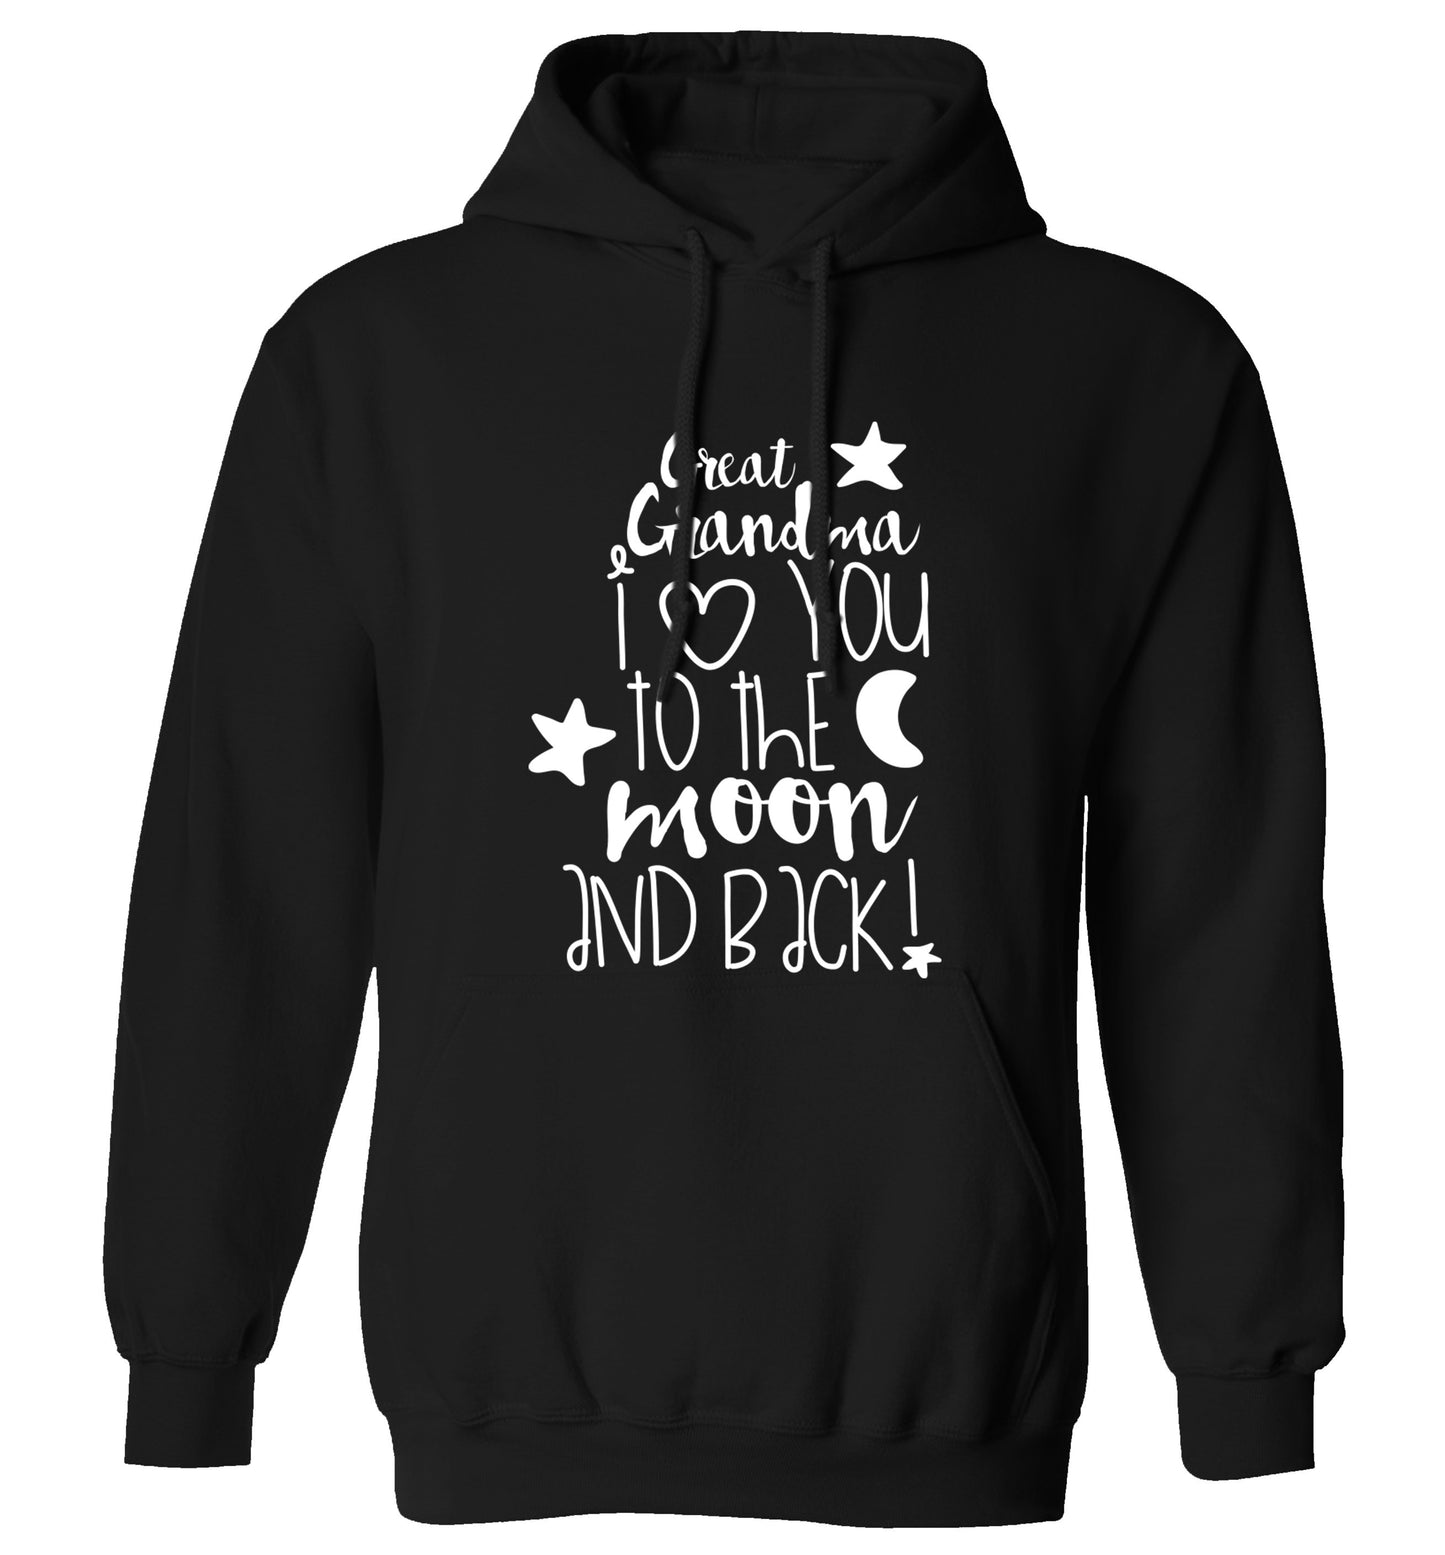 Great Grandma I love you to the moon and back adults unisex black hoodie 2XL